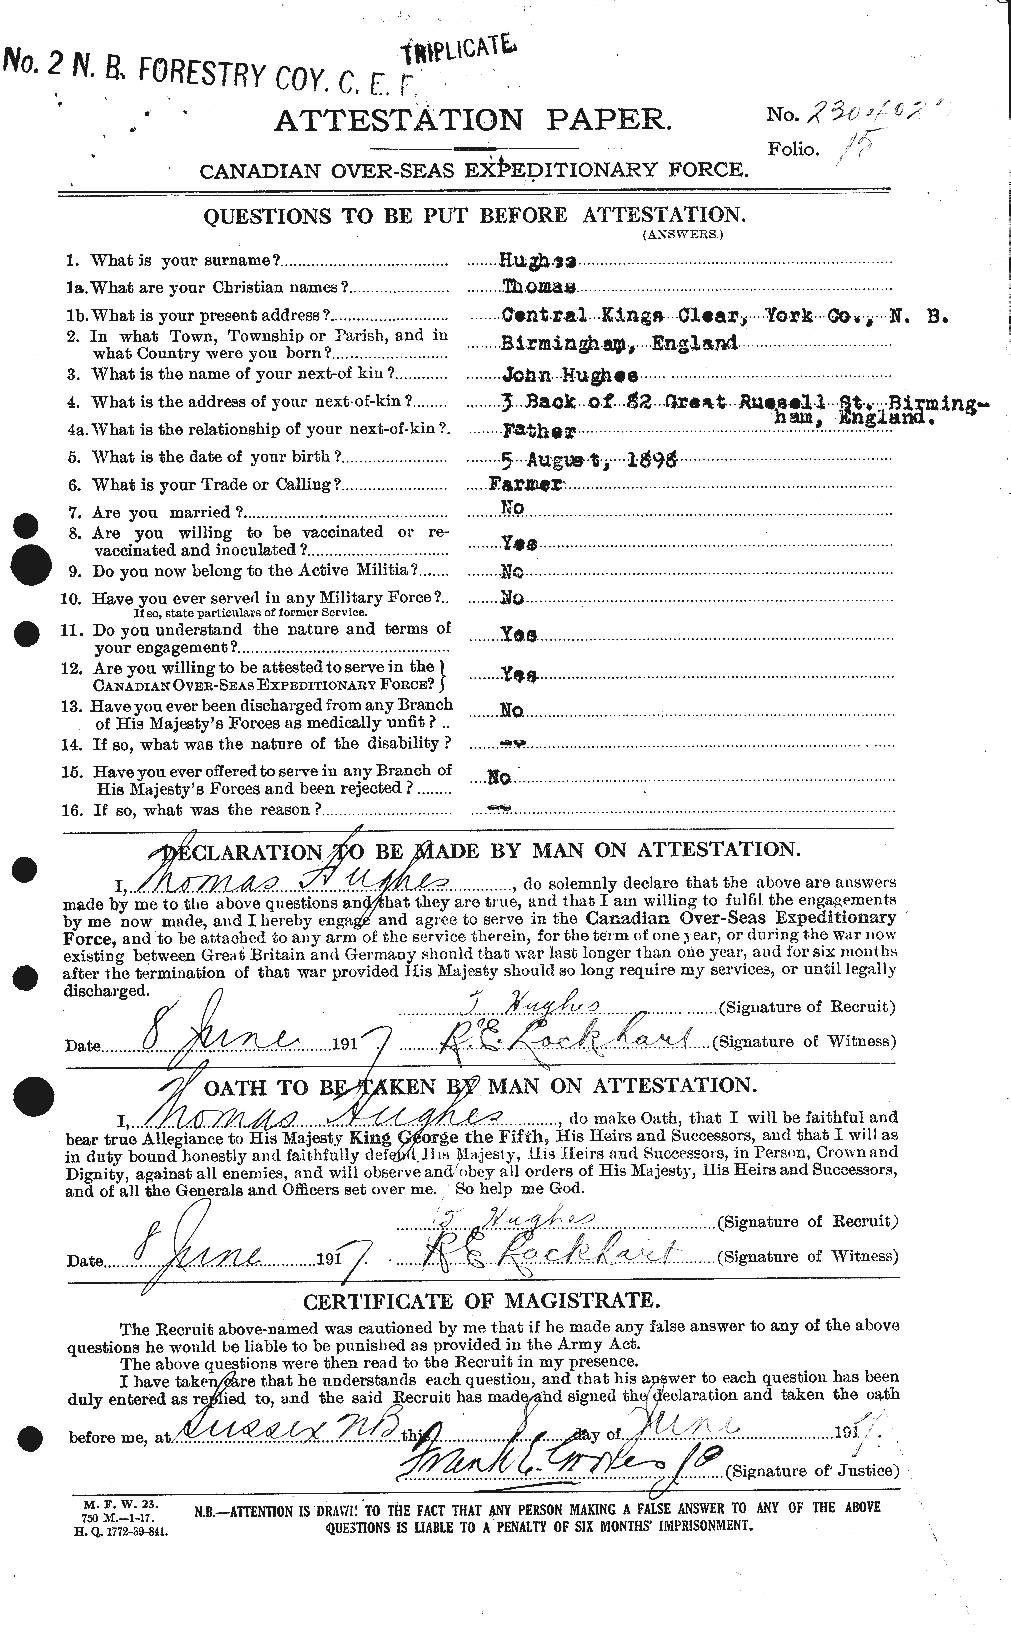 Personnel Records of the First World War - CEF 406663a